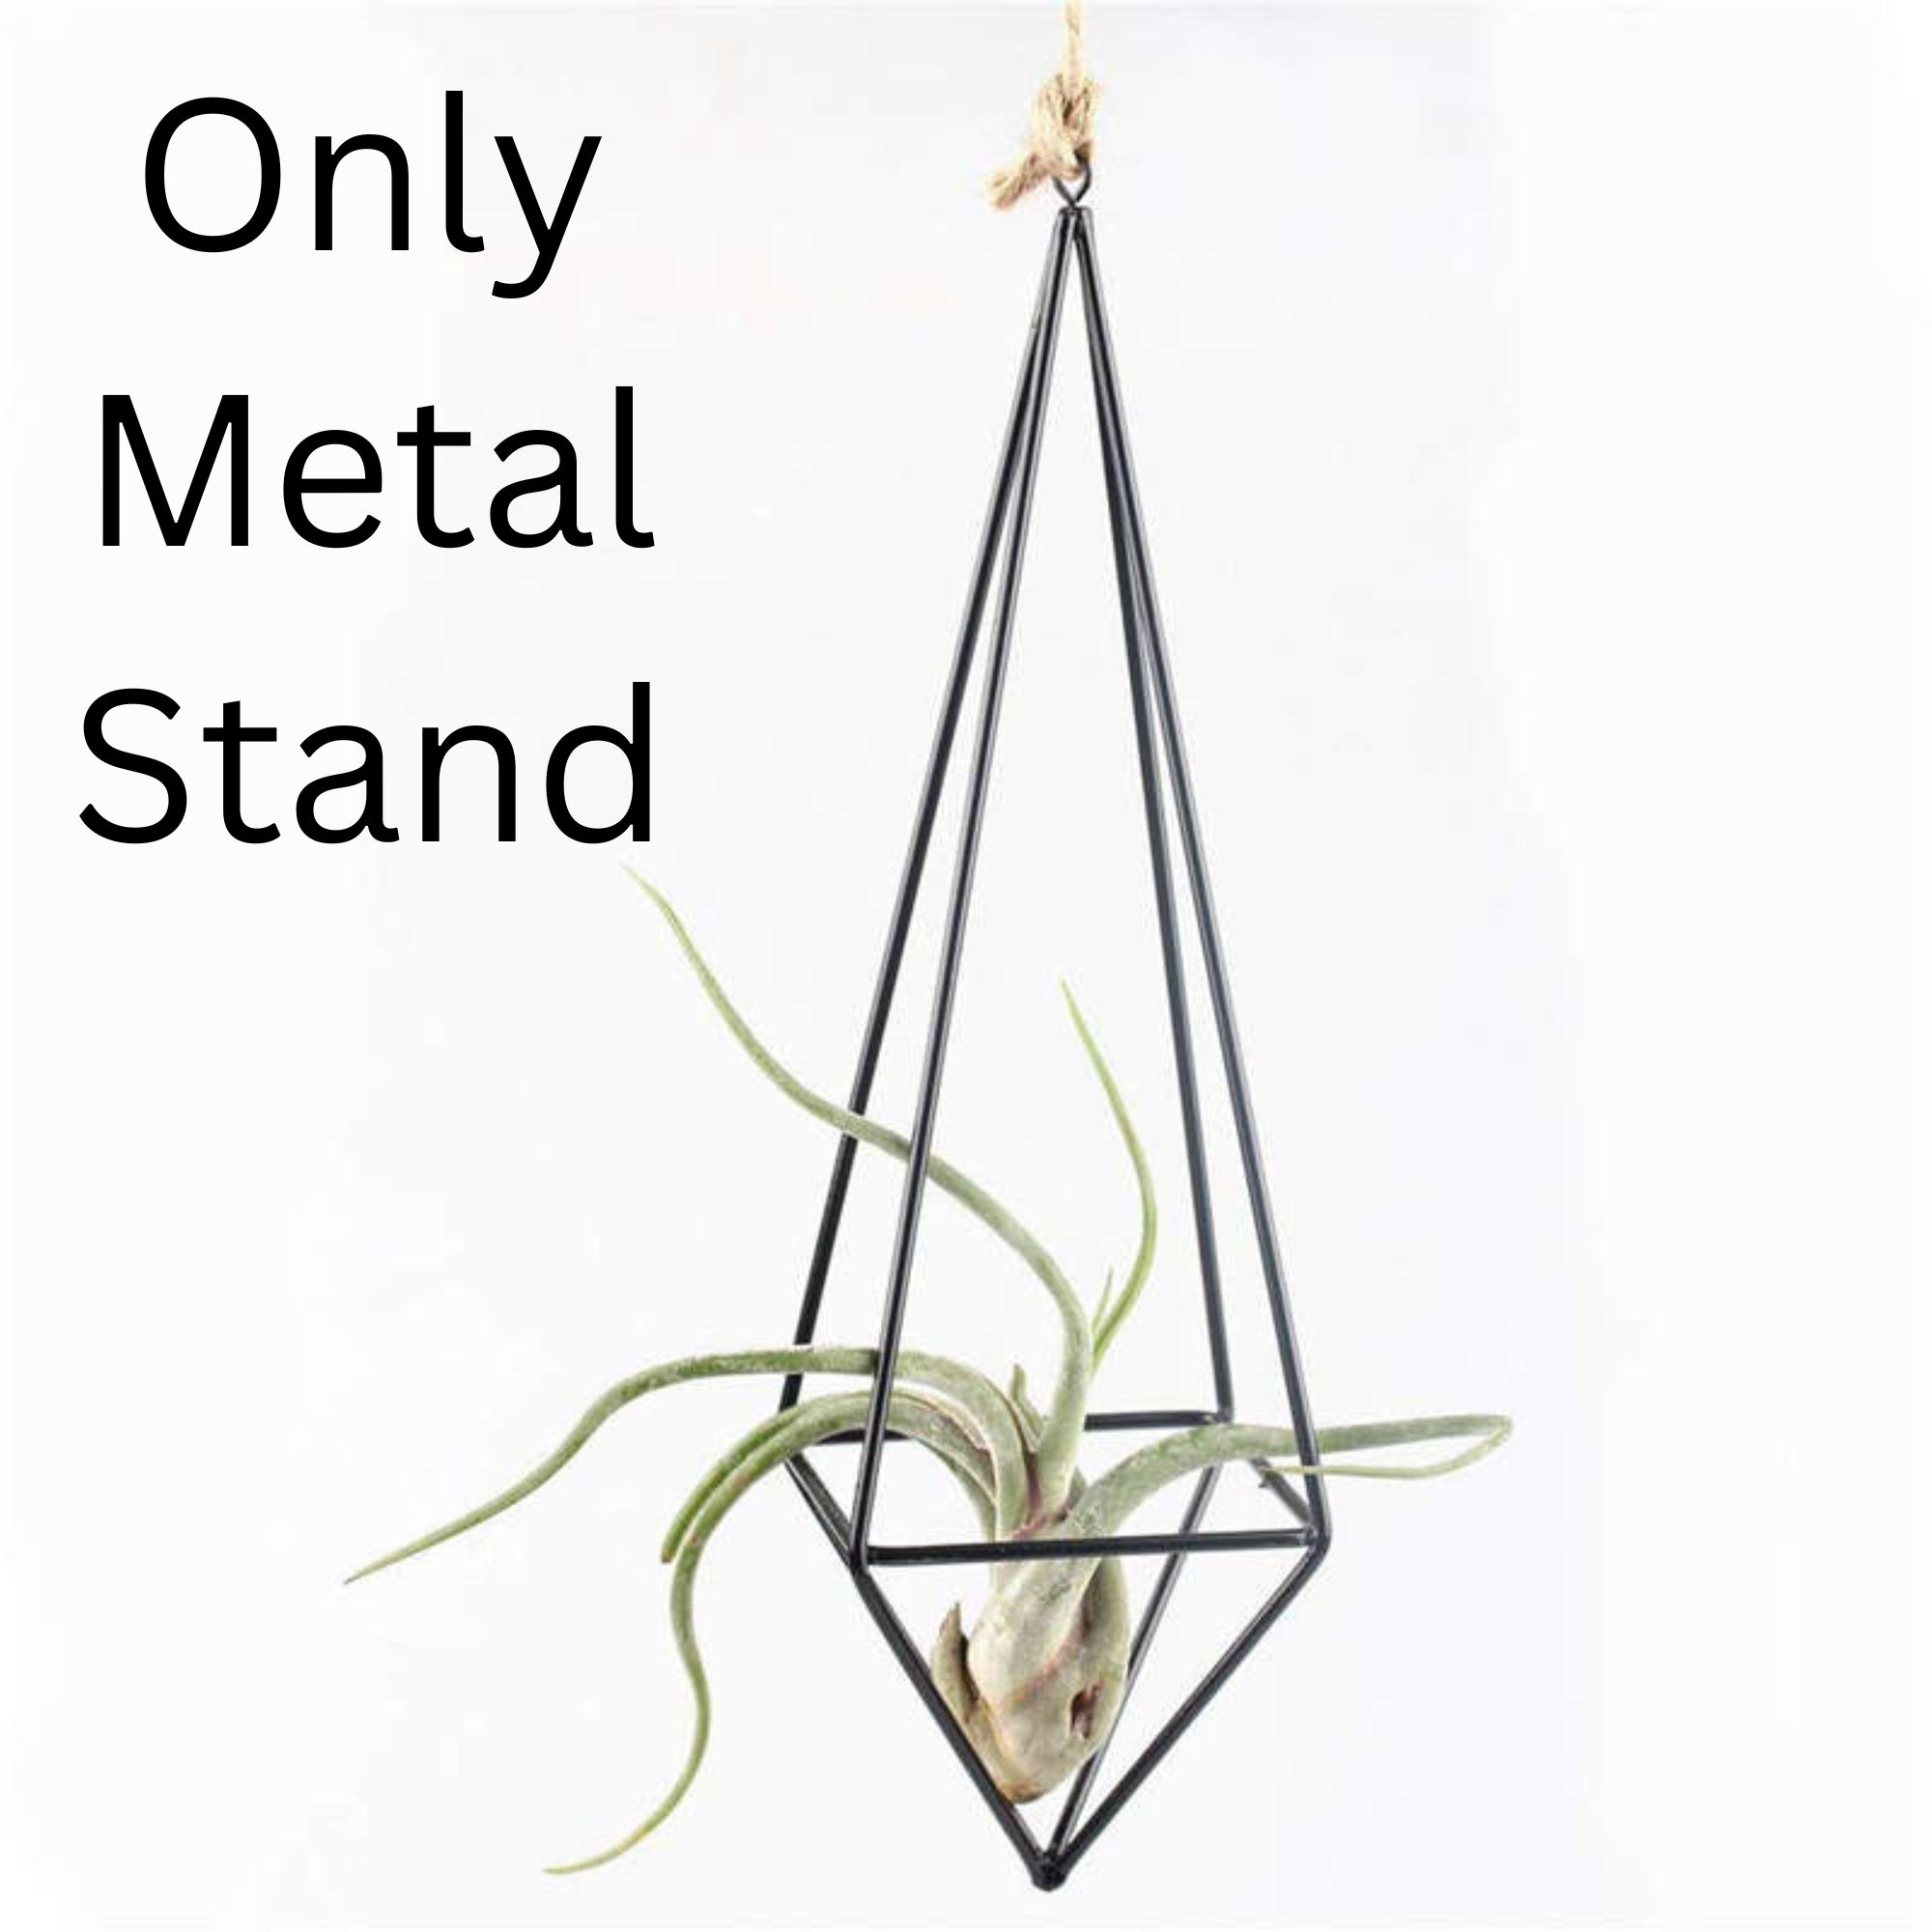 Modern Rustic Art Style Freestanding Hang iron ndsia Air Plant Rack Holder Black 10.2 Inches Height Quadrilateral Pyramid Shape Geometric Hollow Flower Pots